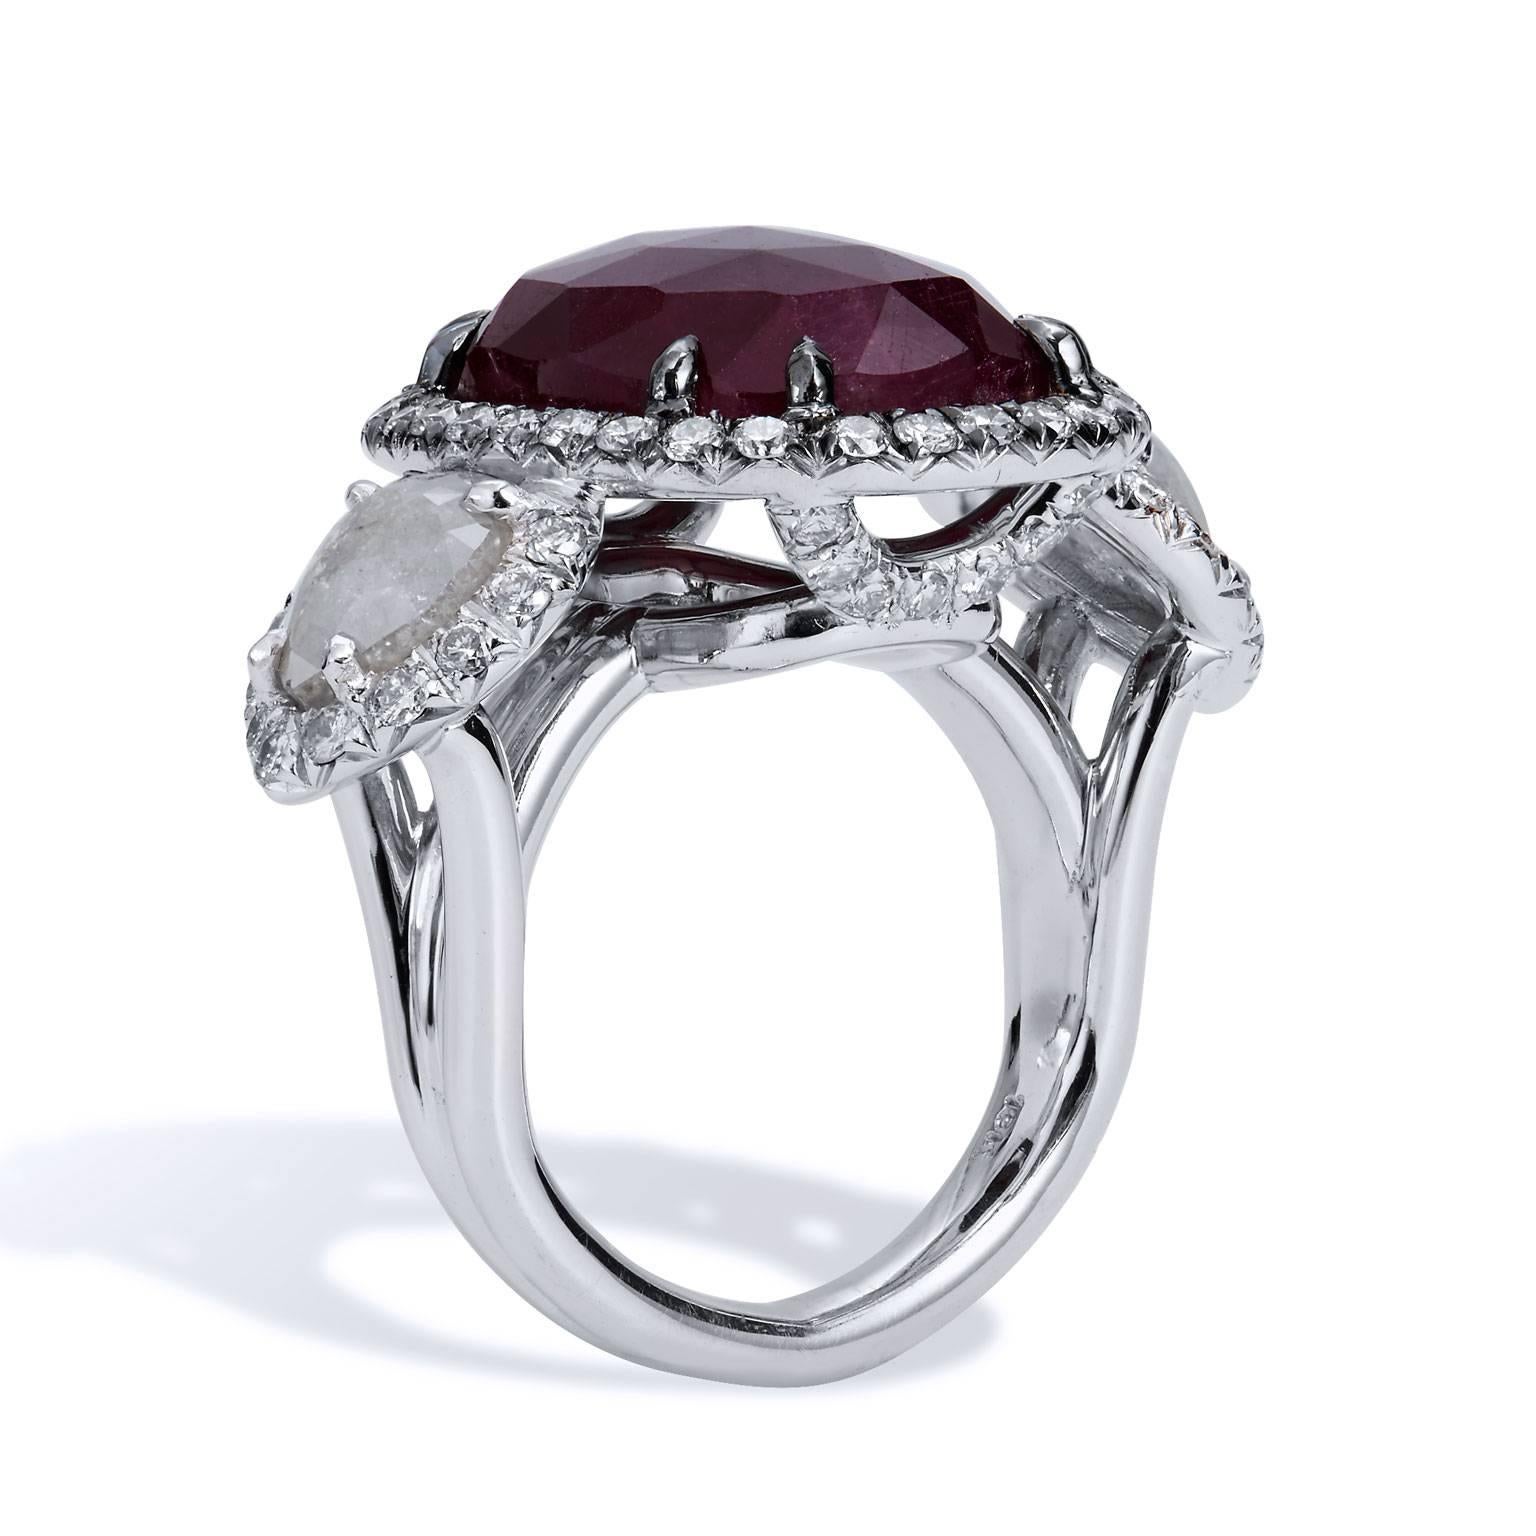 18.00 Carat Rose Cut Ruby and Diamond Slice 18 kt White Gold Cocktail Ring

Hues of deep red emit warmth and romance from the 18.00 carat ruby, as two rose cut diamond slices affixed at the shoulder glisten with pristine beauty. Handmade by H&H, the